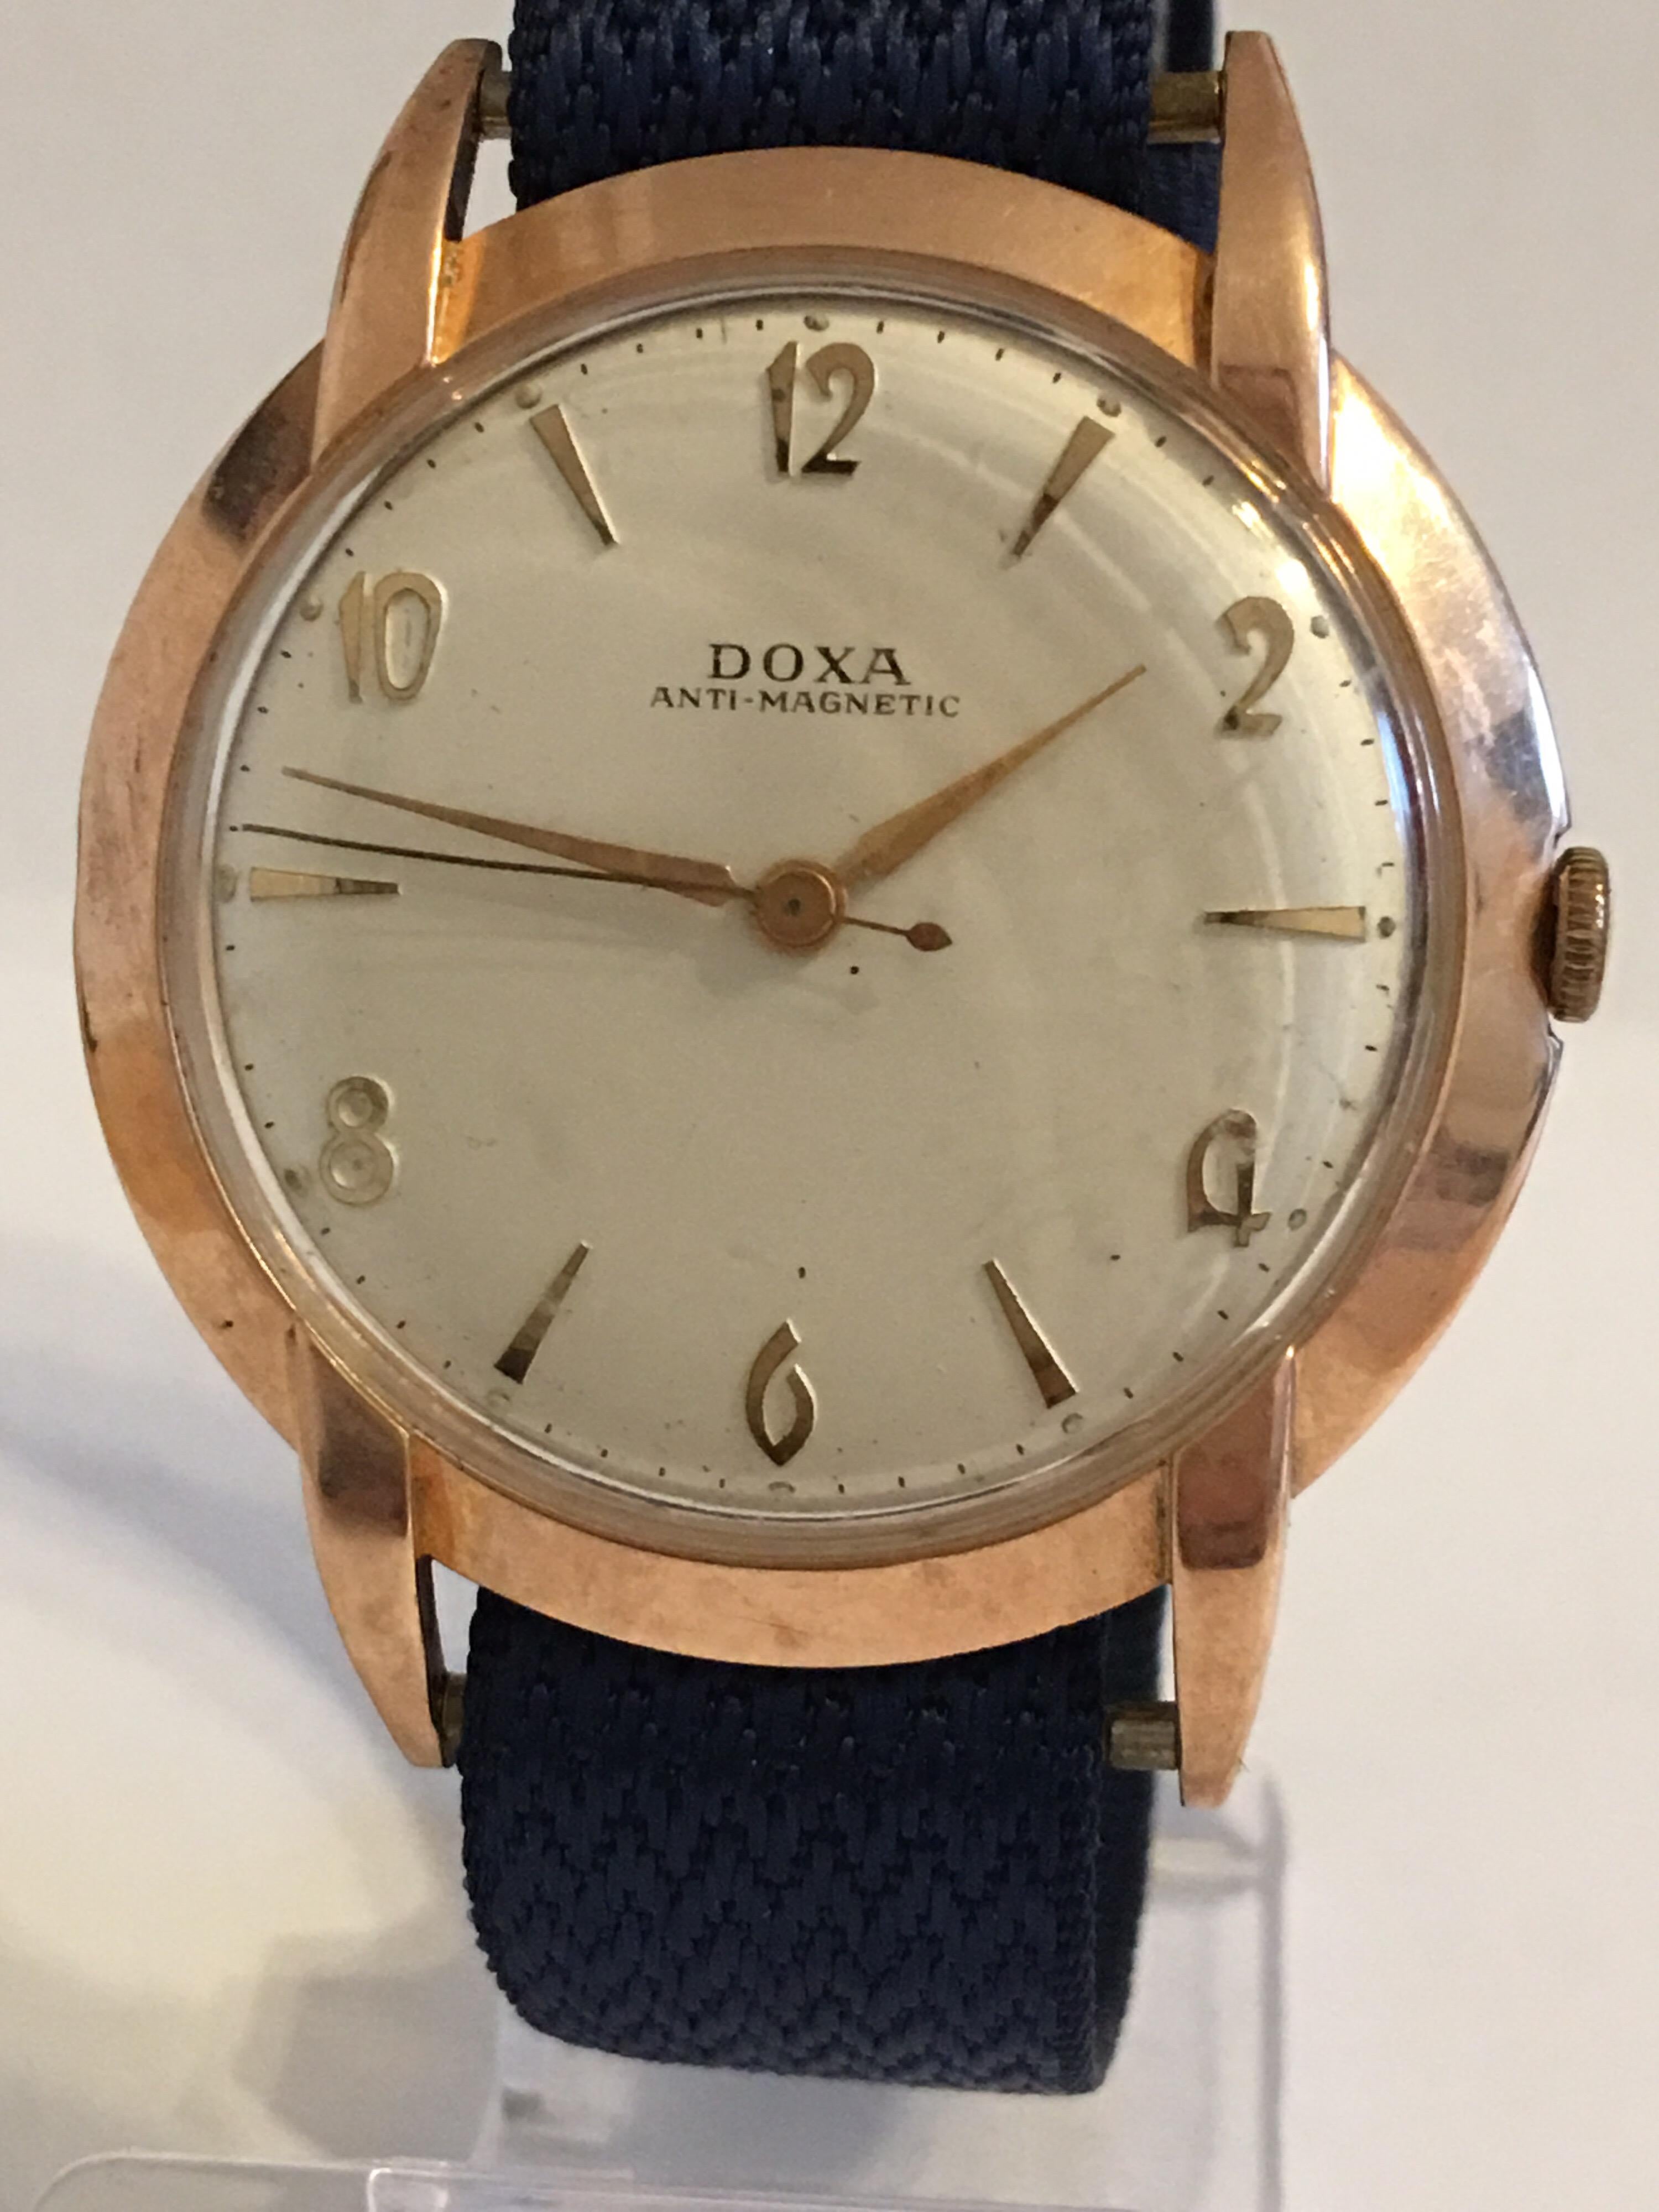 This Vintage mechanical 14K Gold watch is in good Working condition and is ticking well. Visible scratches and dents on the back watch case as shown
The cloth material strap is a bit worn and the strap buckle is silver plated Please study the images